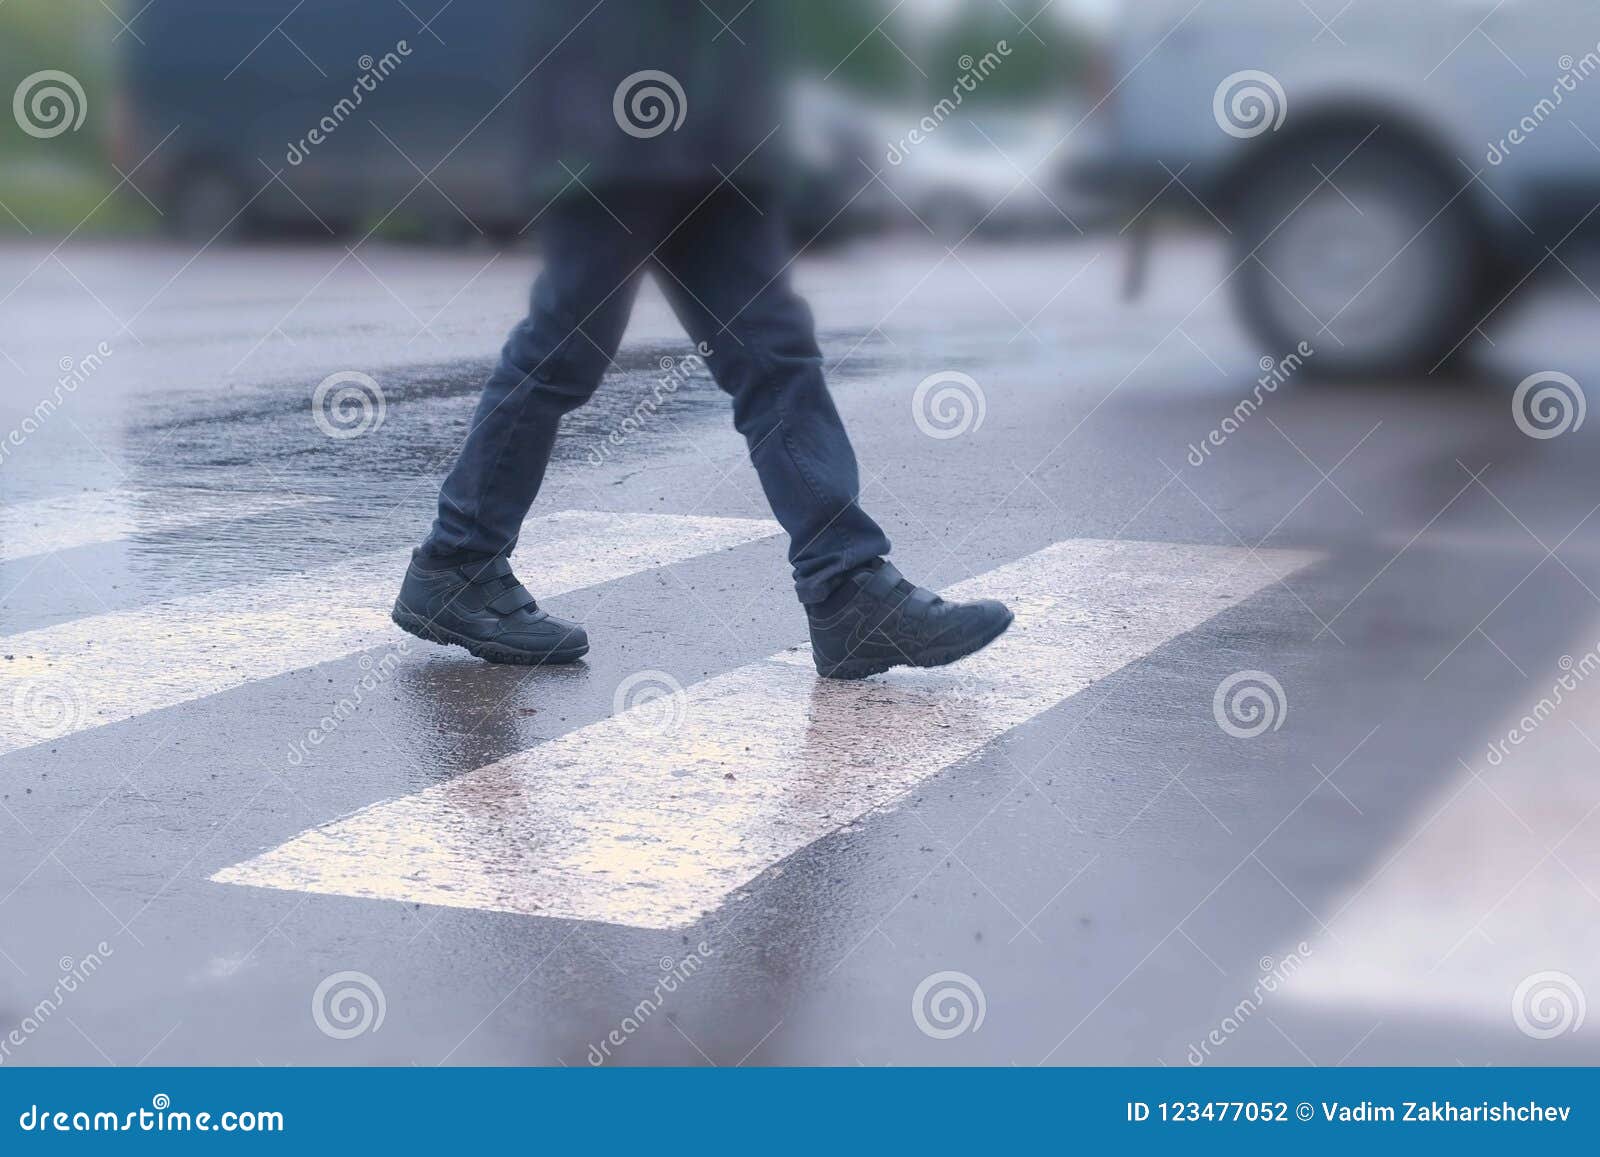 boy crosses the road at a pedestrian crossing in the rain. legs close-up.